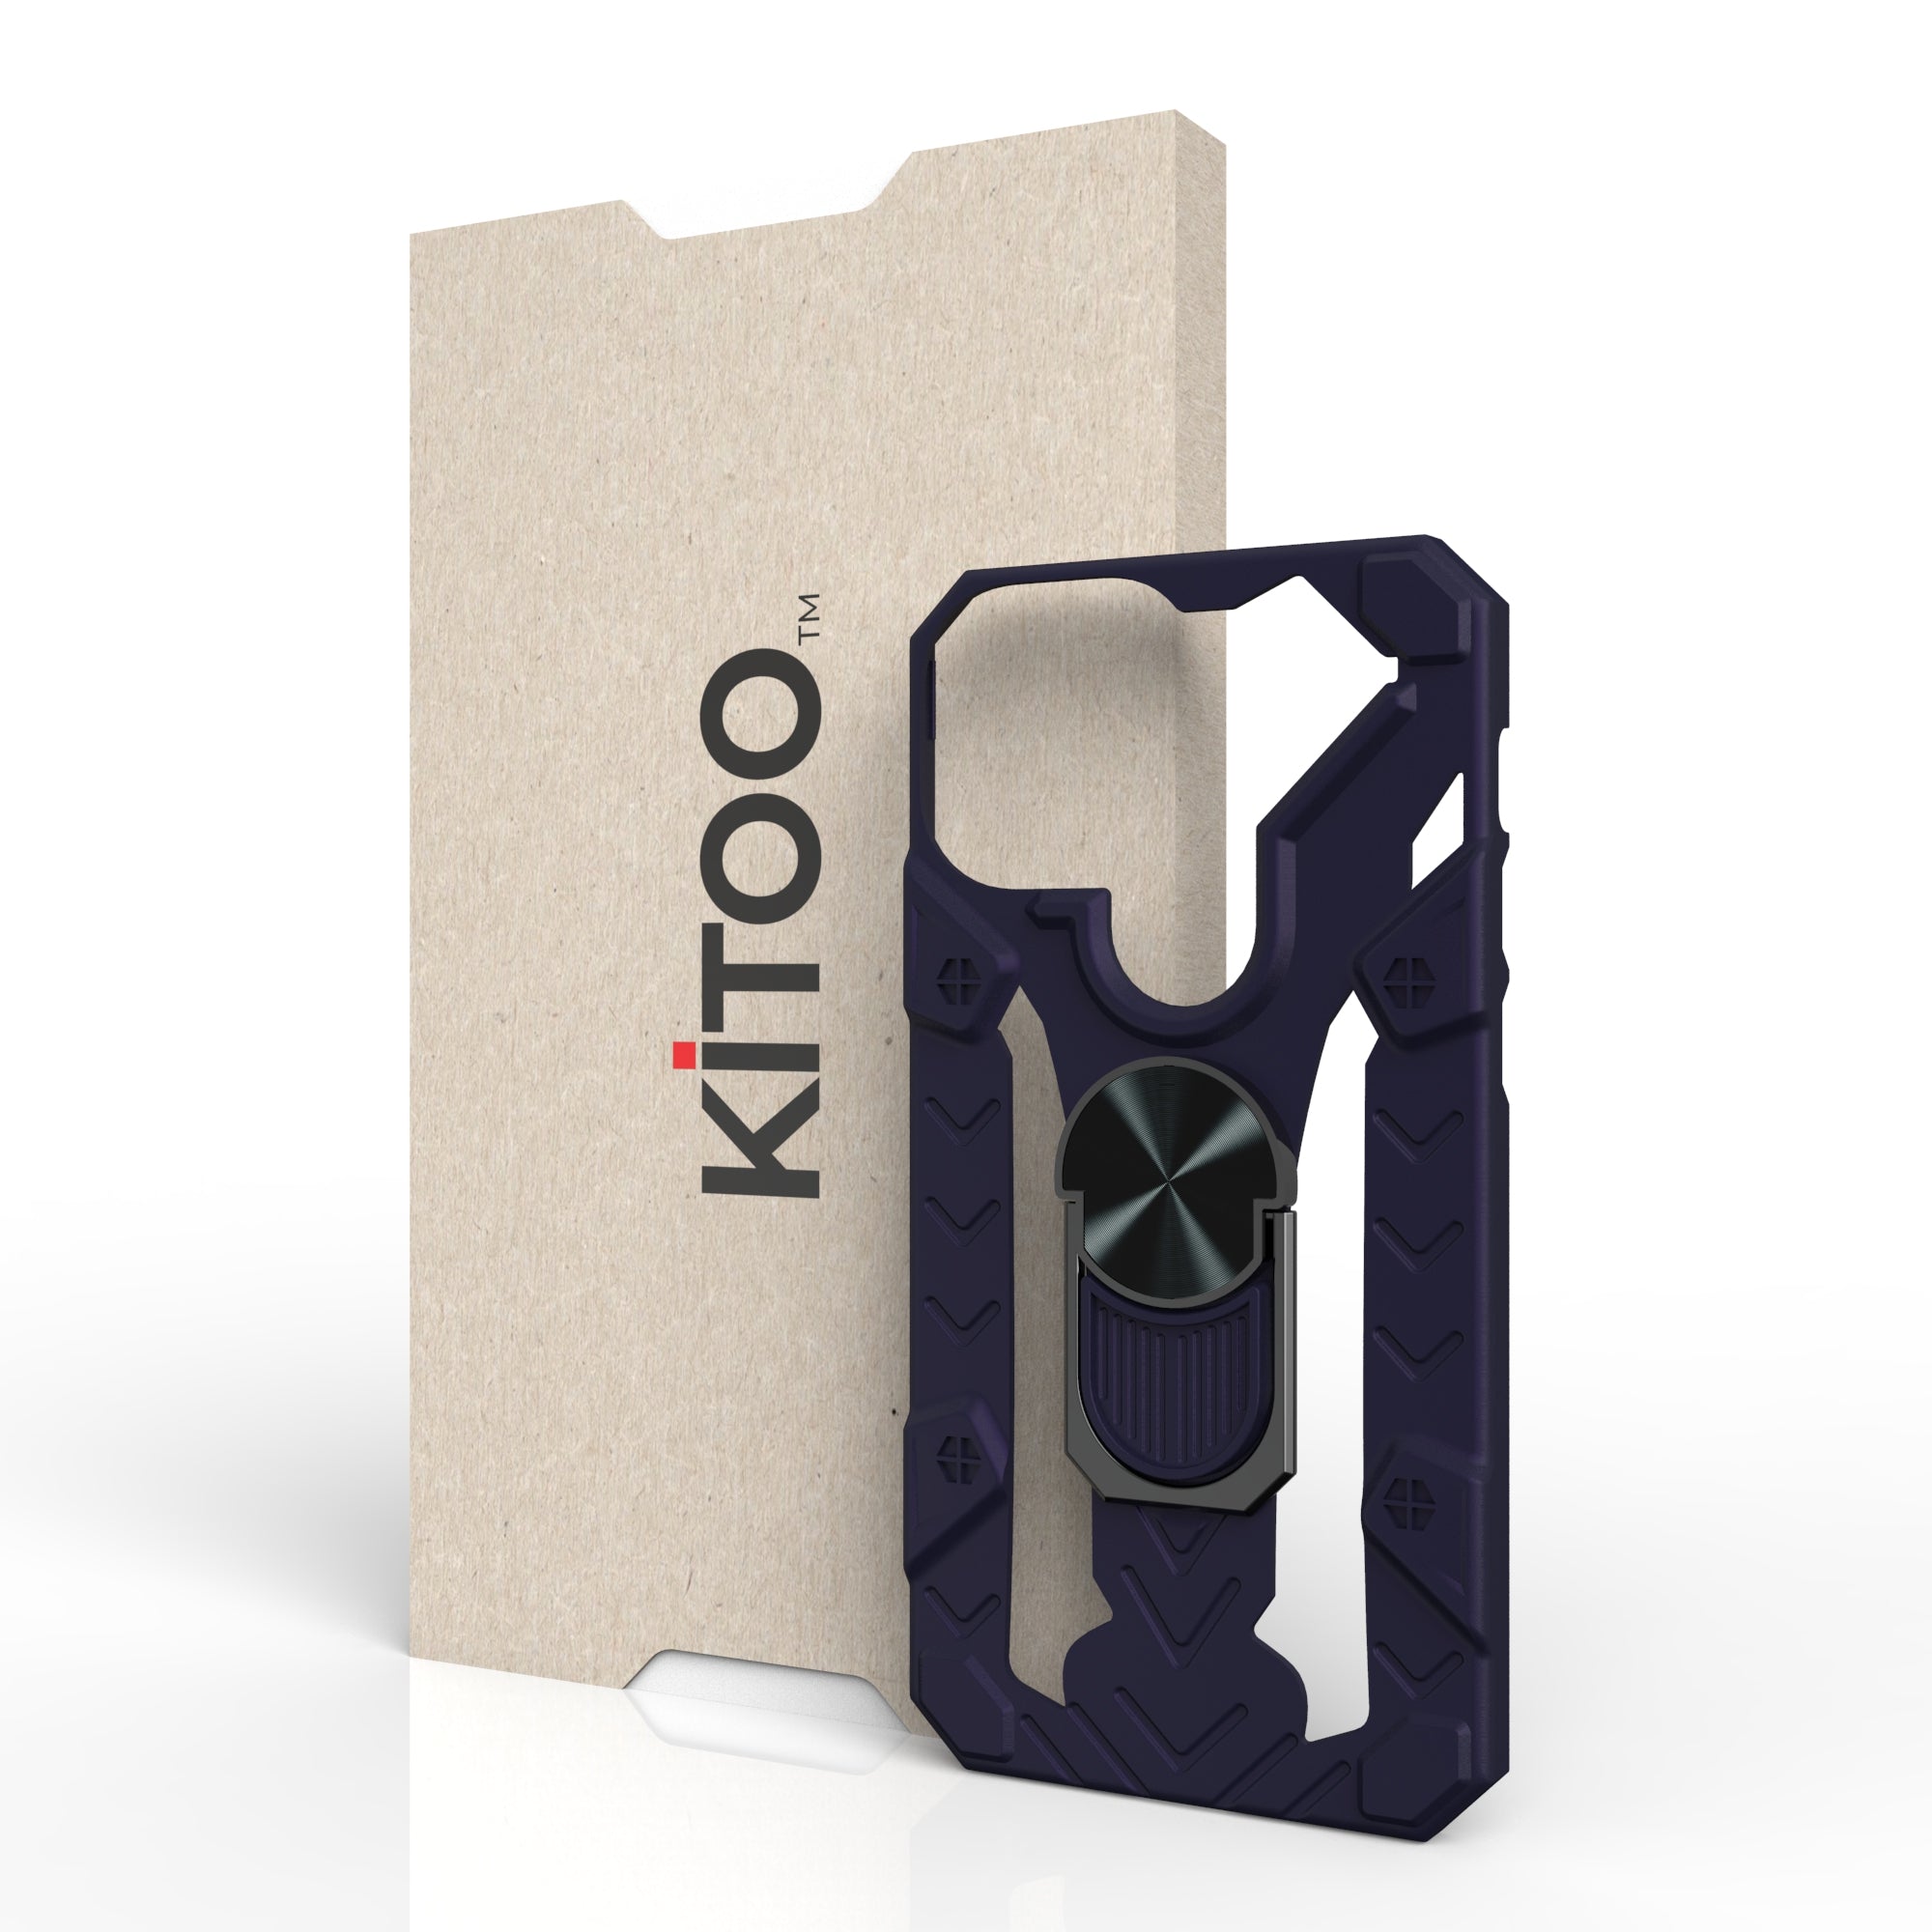 Kitoo Ring Panel Designed for iPhone 13 Mini case (Spare Part only) - Dark Blue